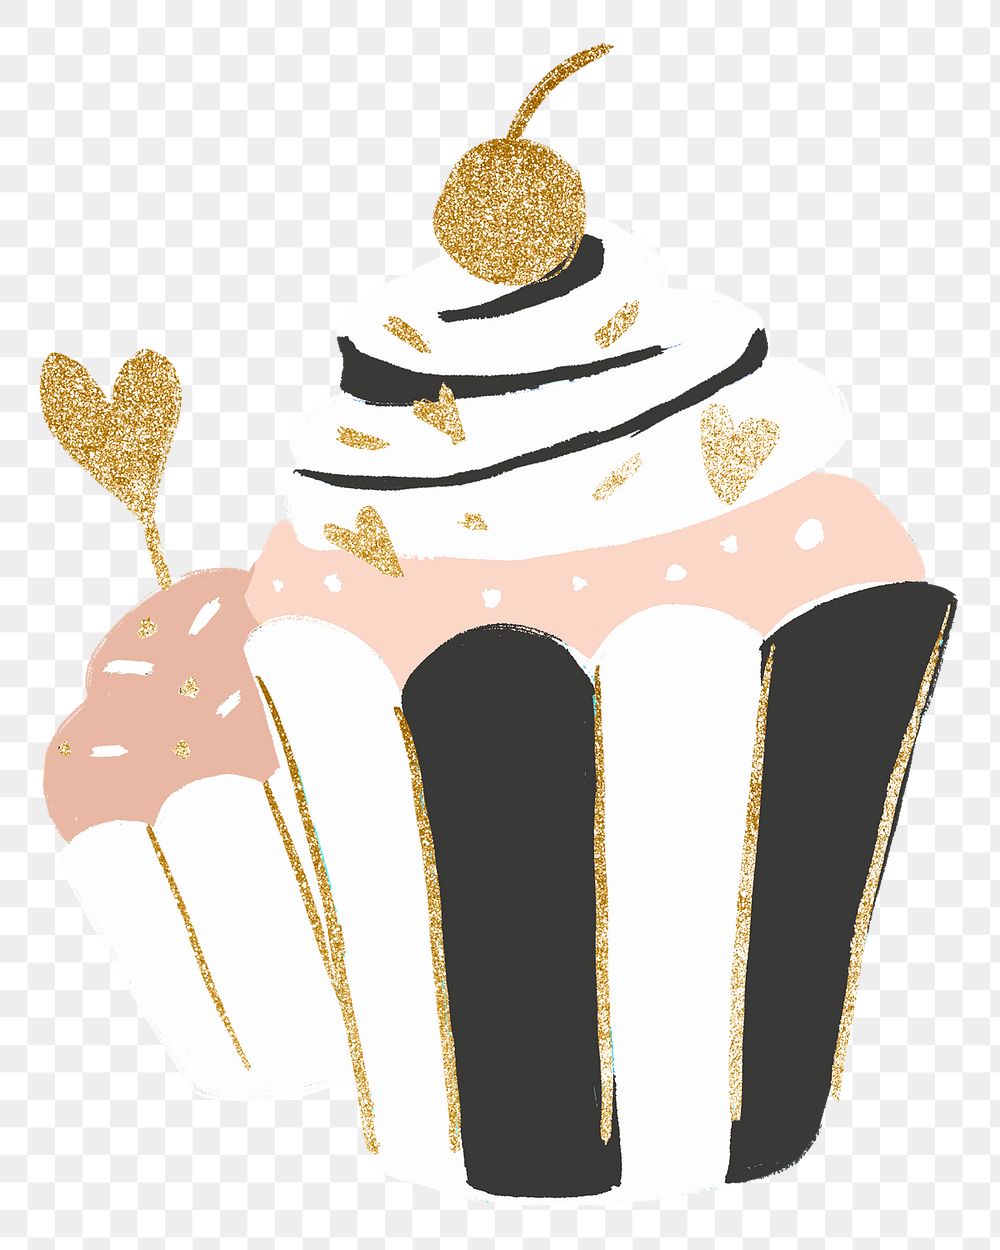 Cupcake PNG sticker, glitter gold and pastel pink design